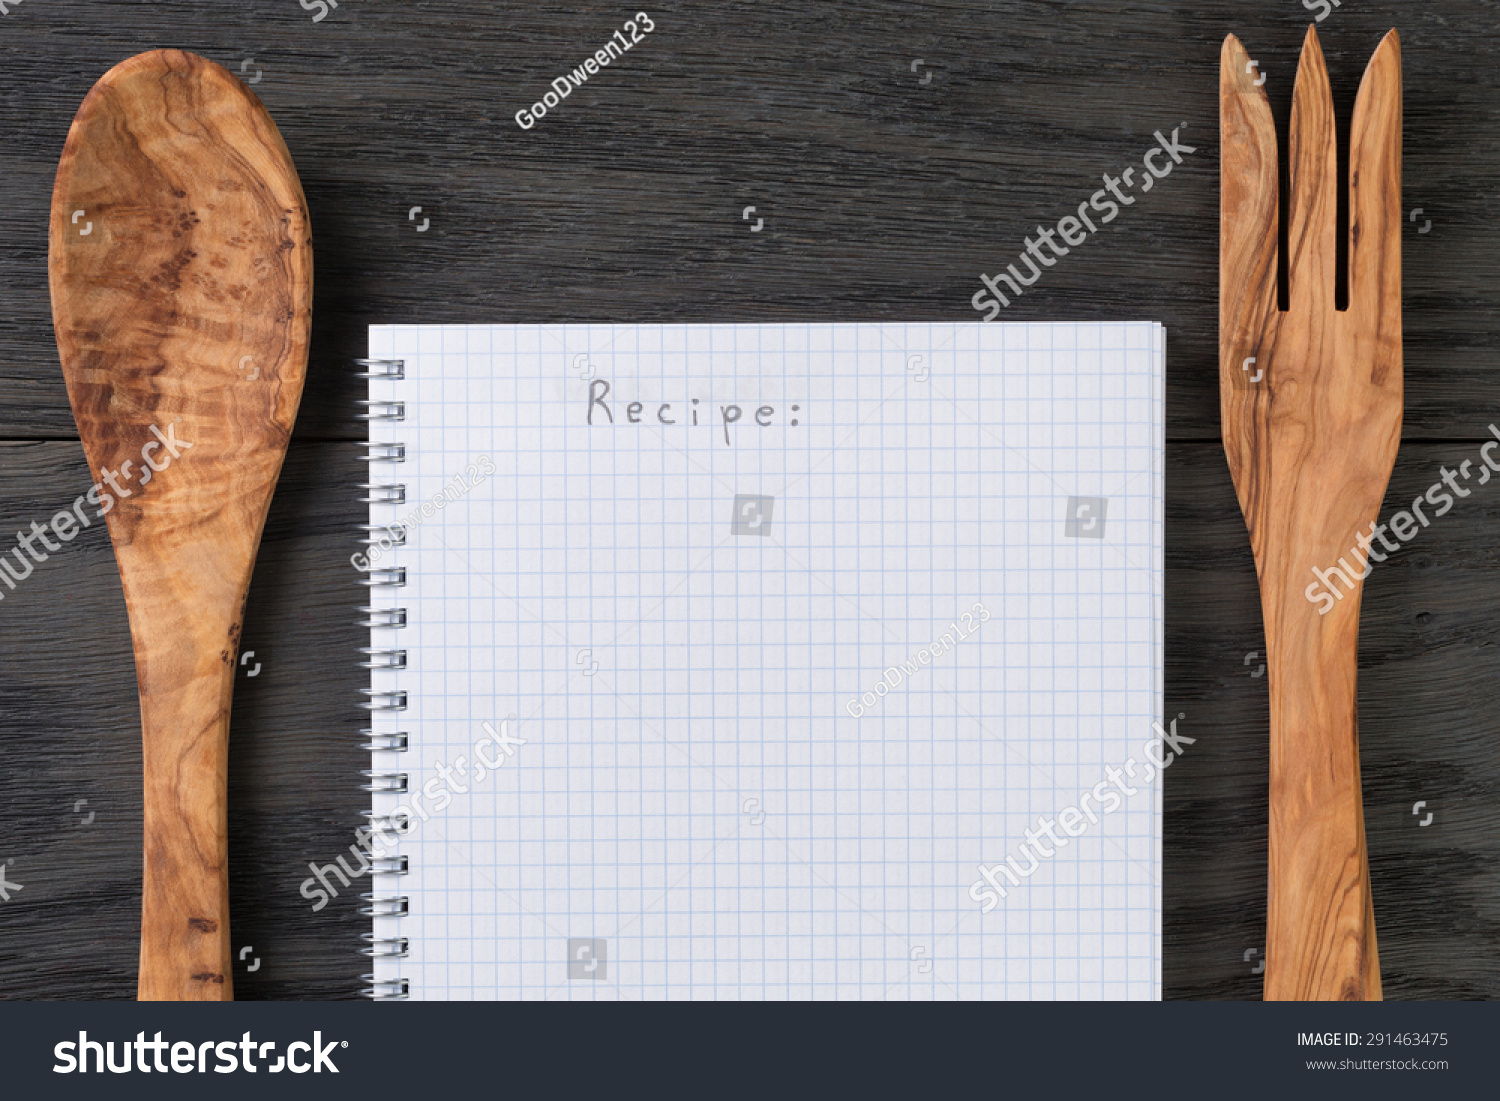 Notepad Template For Word from image.shutterstock.com